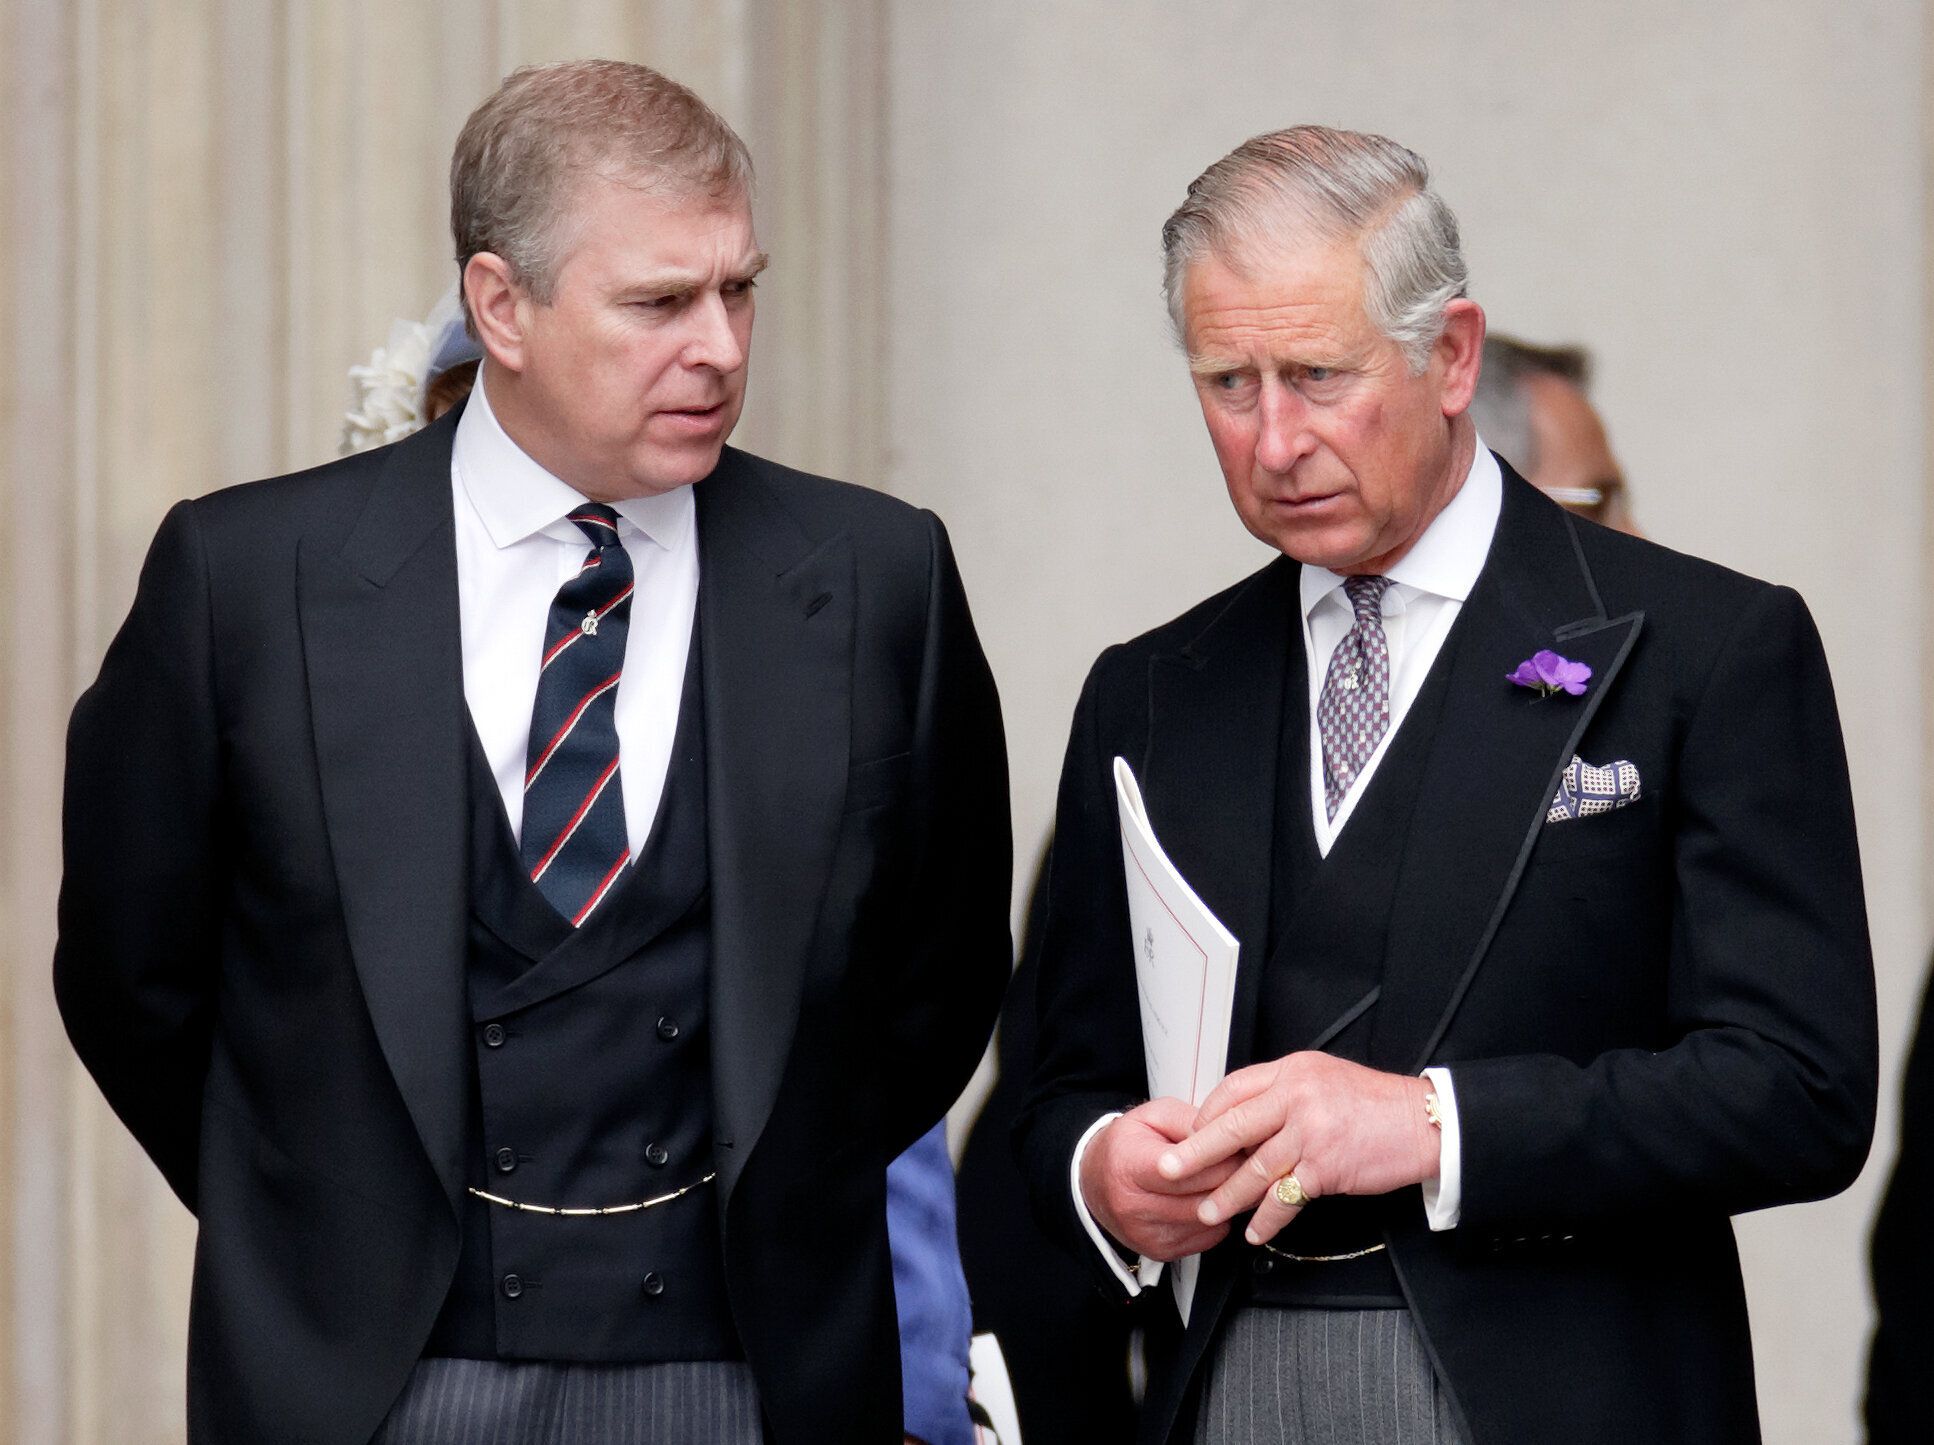 Prince Andrew (left) and Prince Charles (right) in 2012.